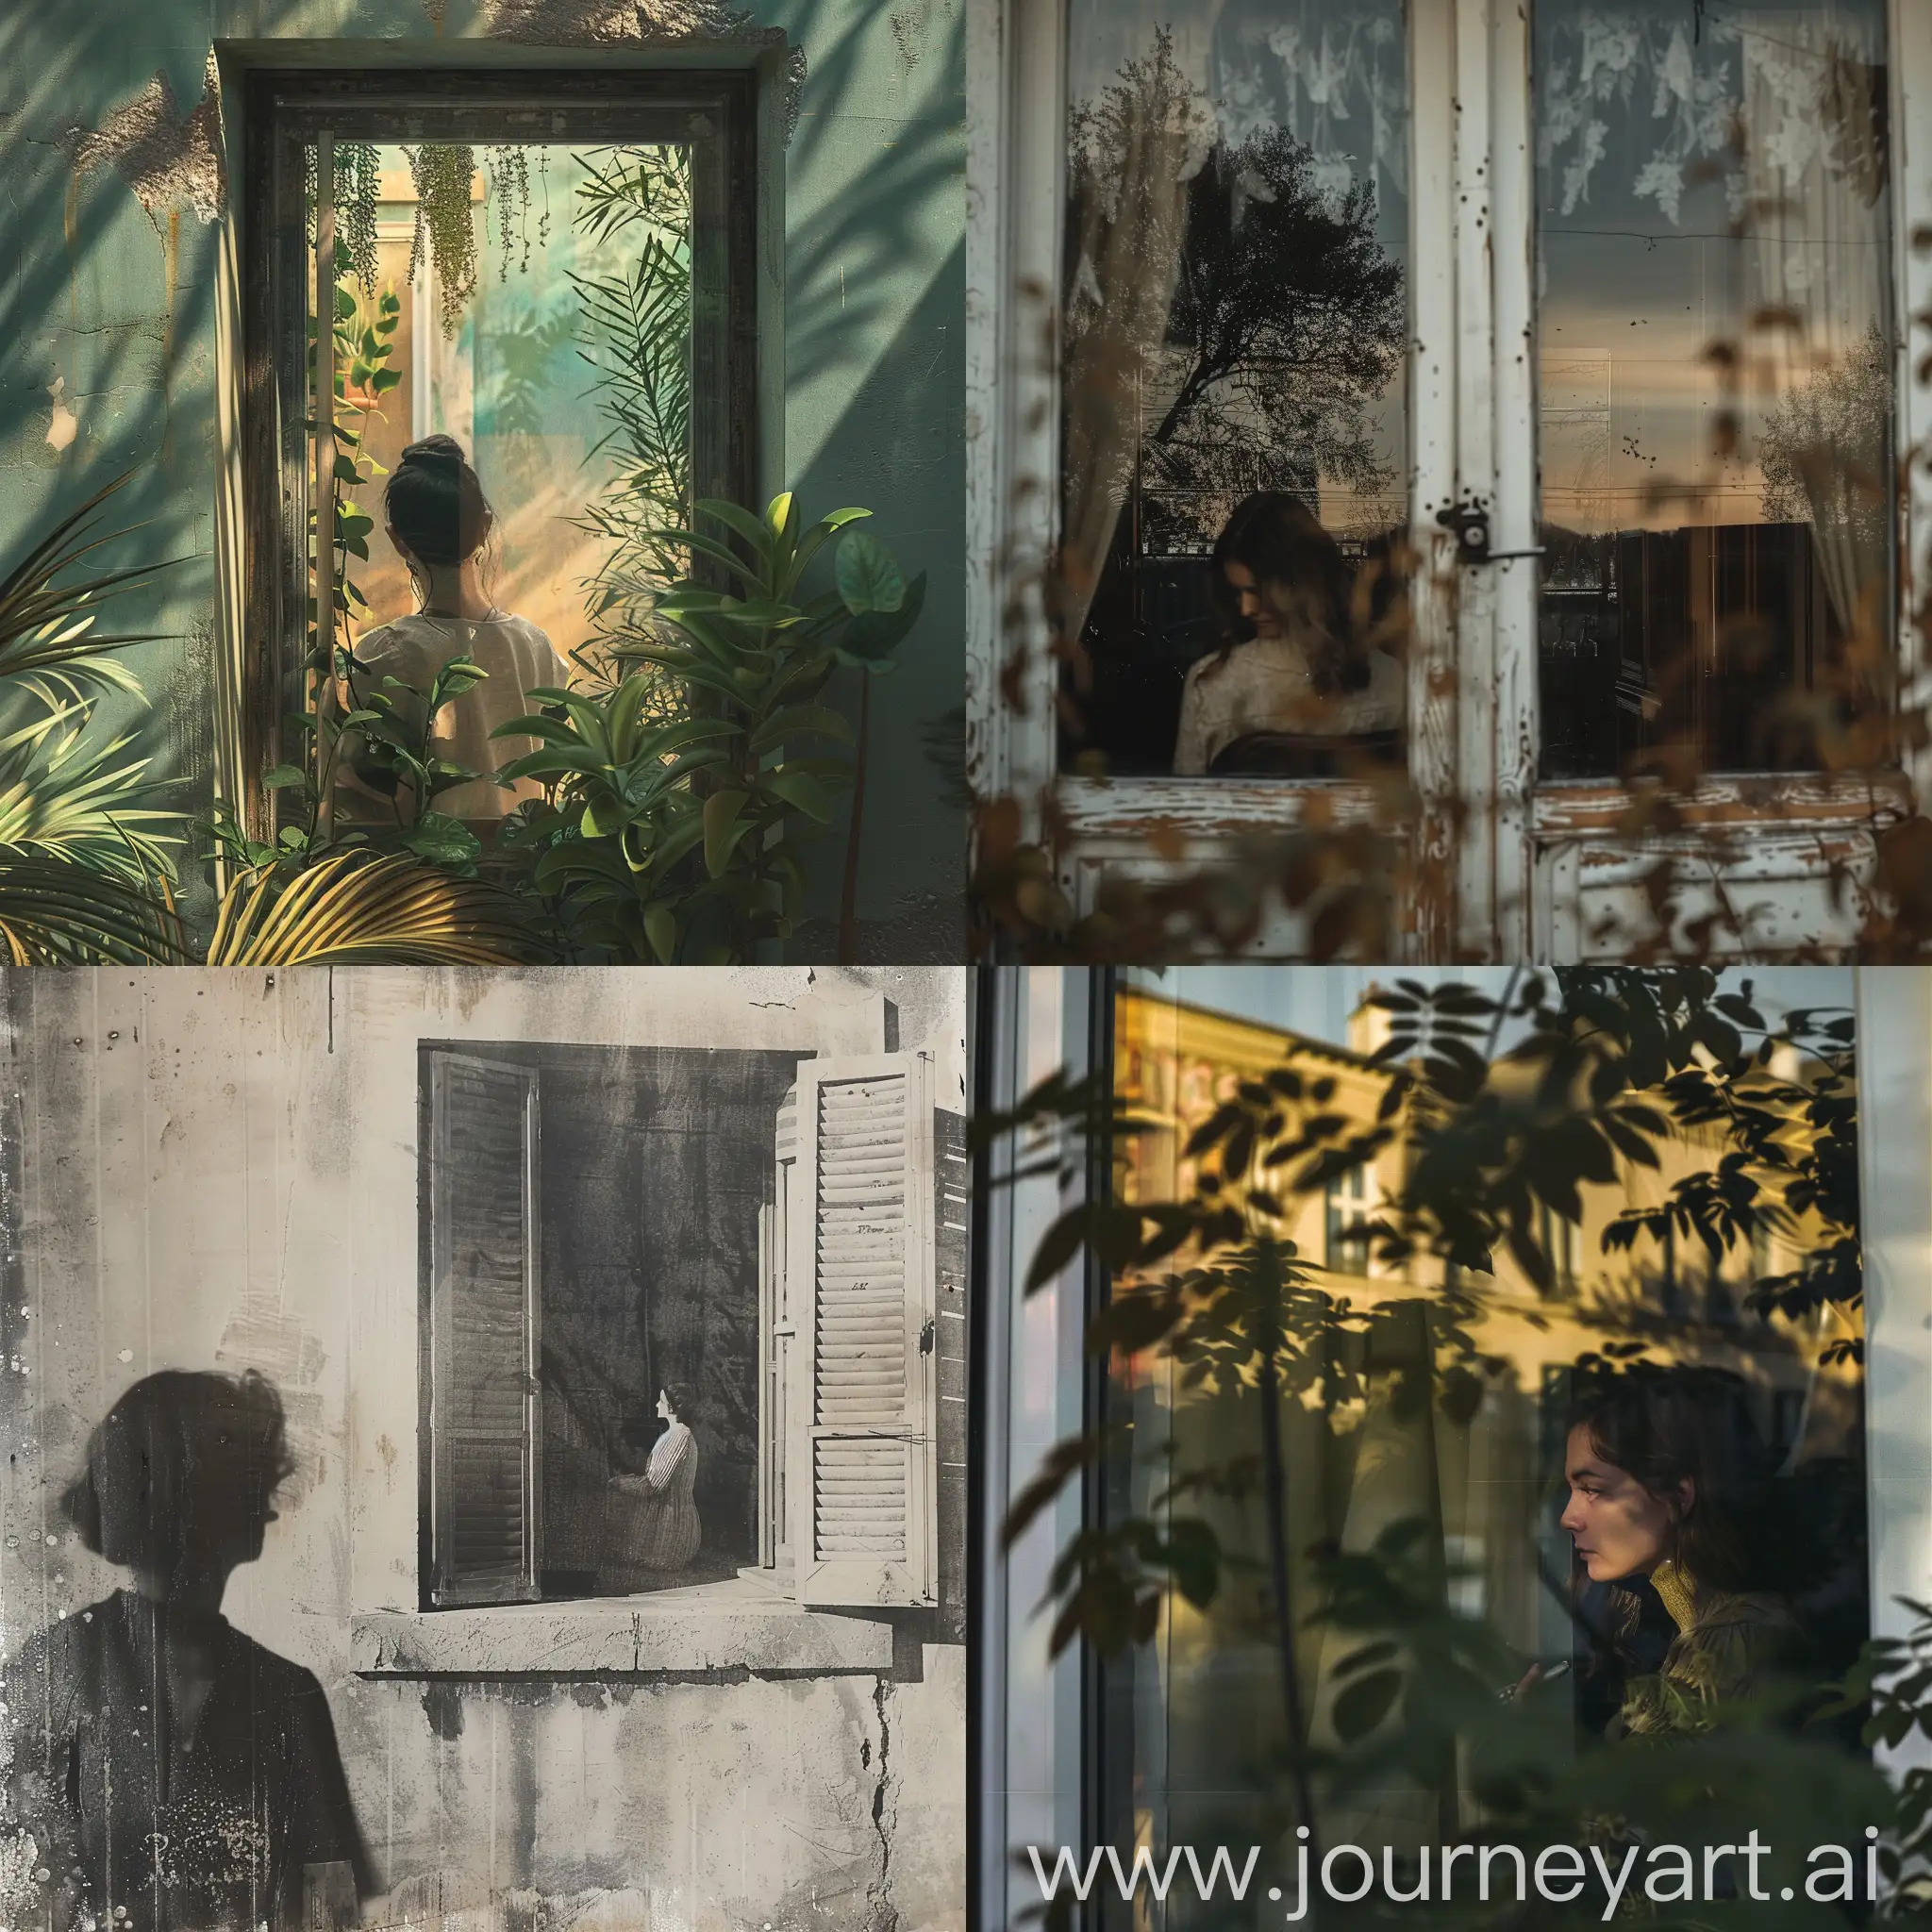 outdoor scene looking into window where you can see a woman 